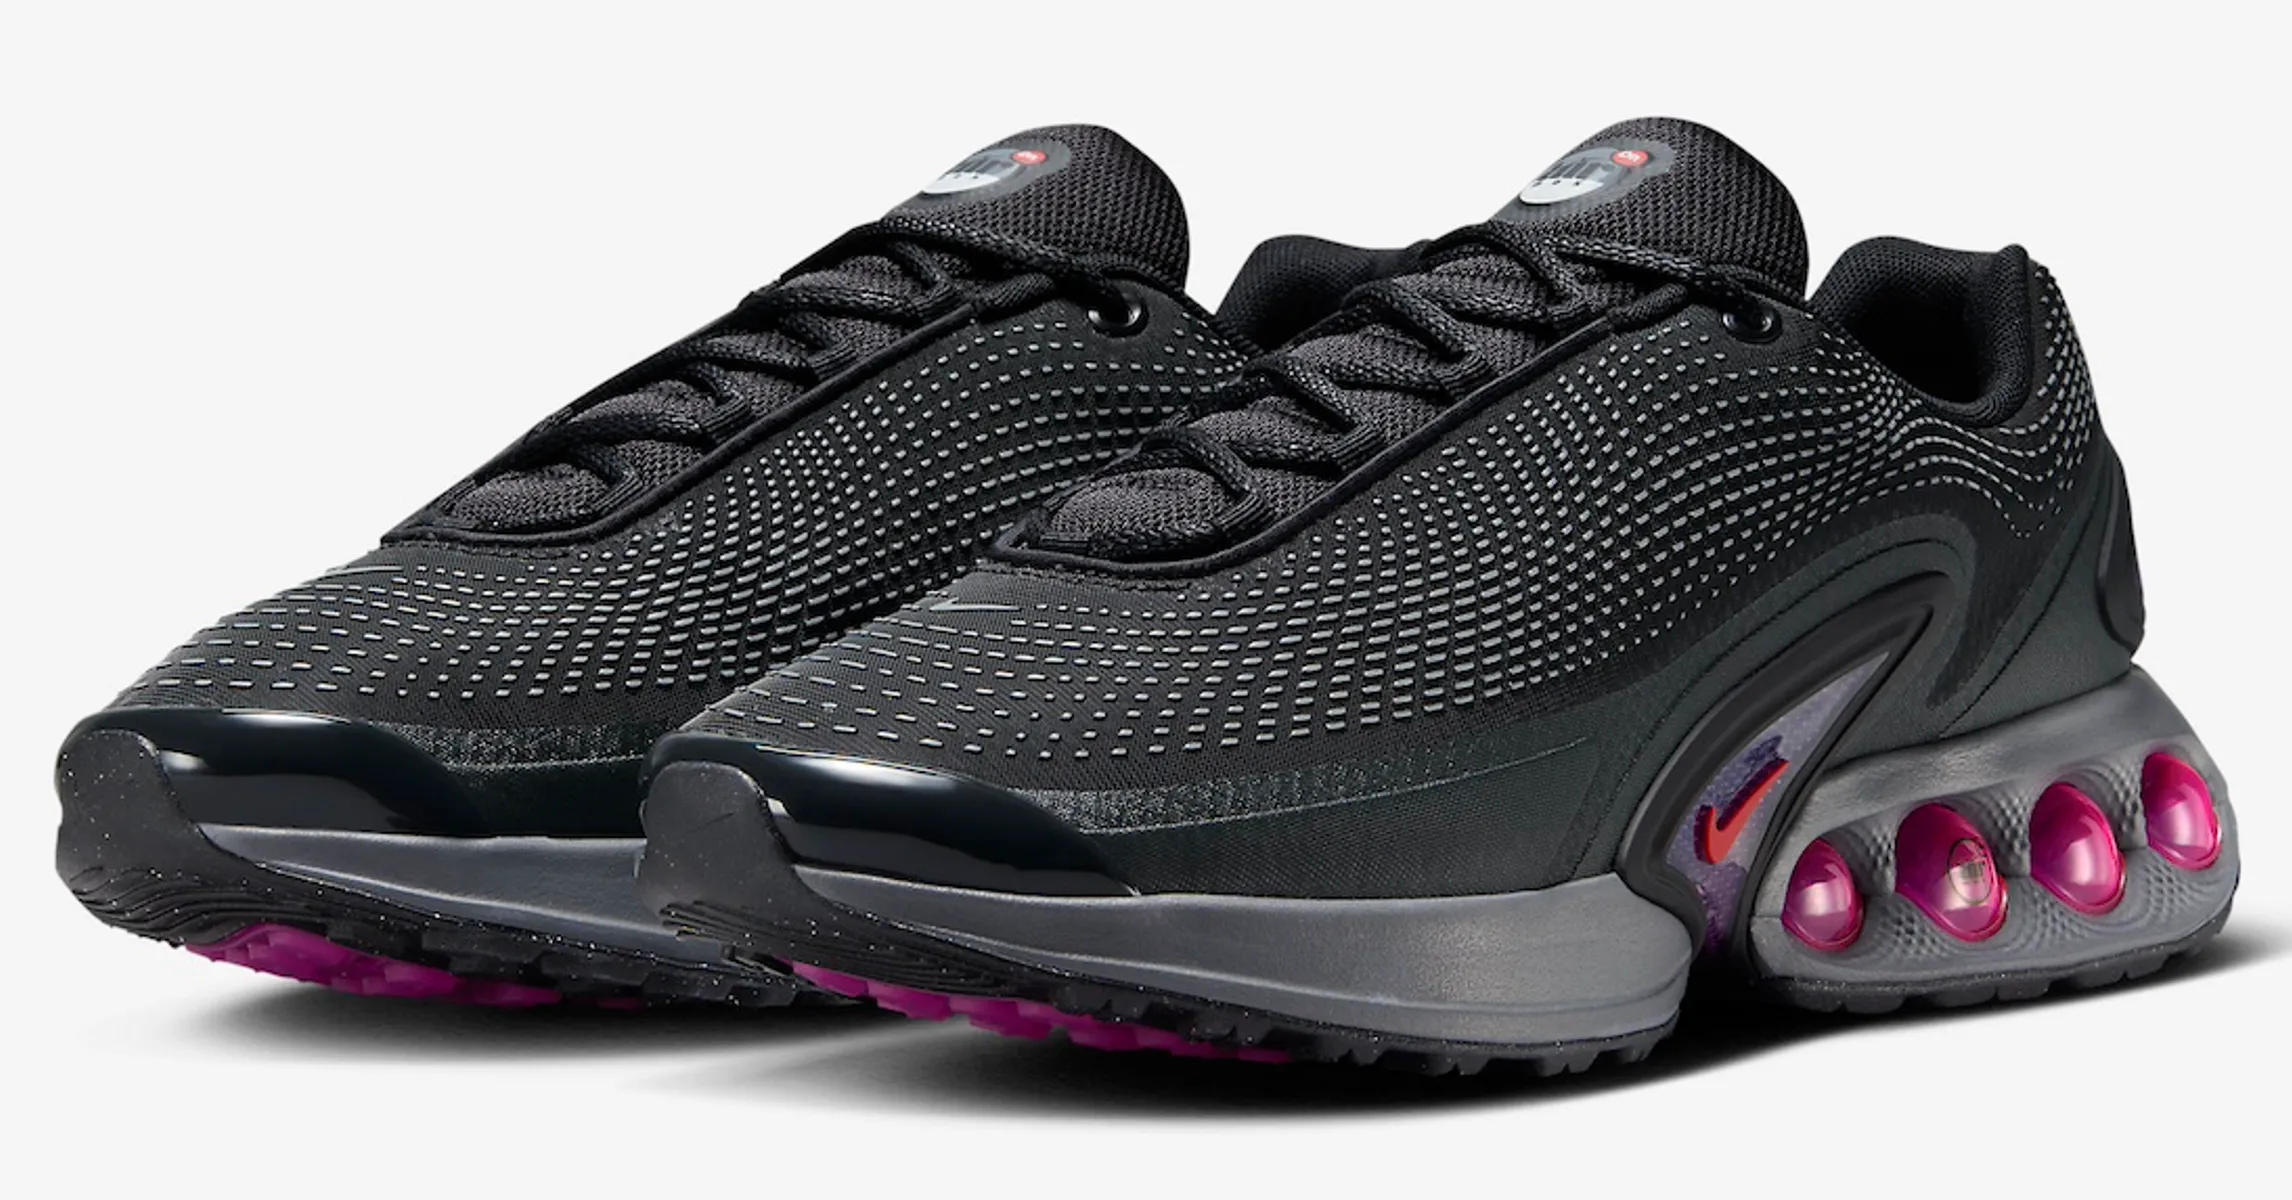 Nike Air Max DN “All Night” Official Photos Revealed